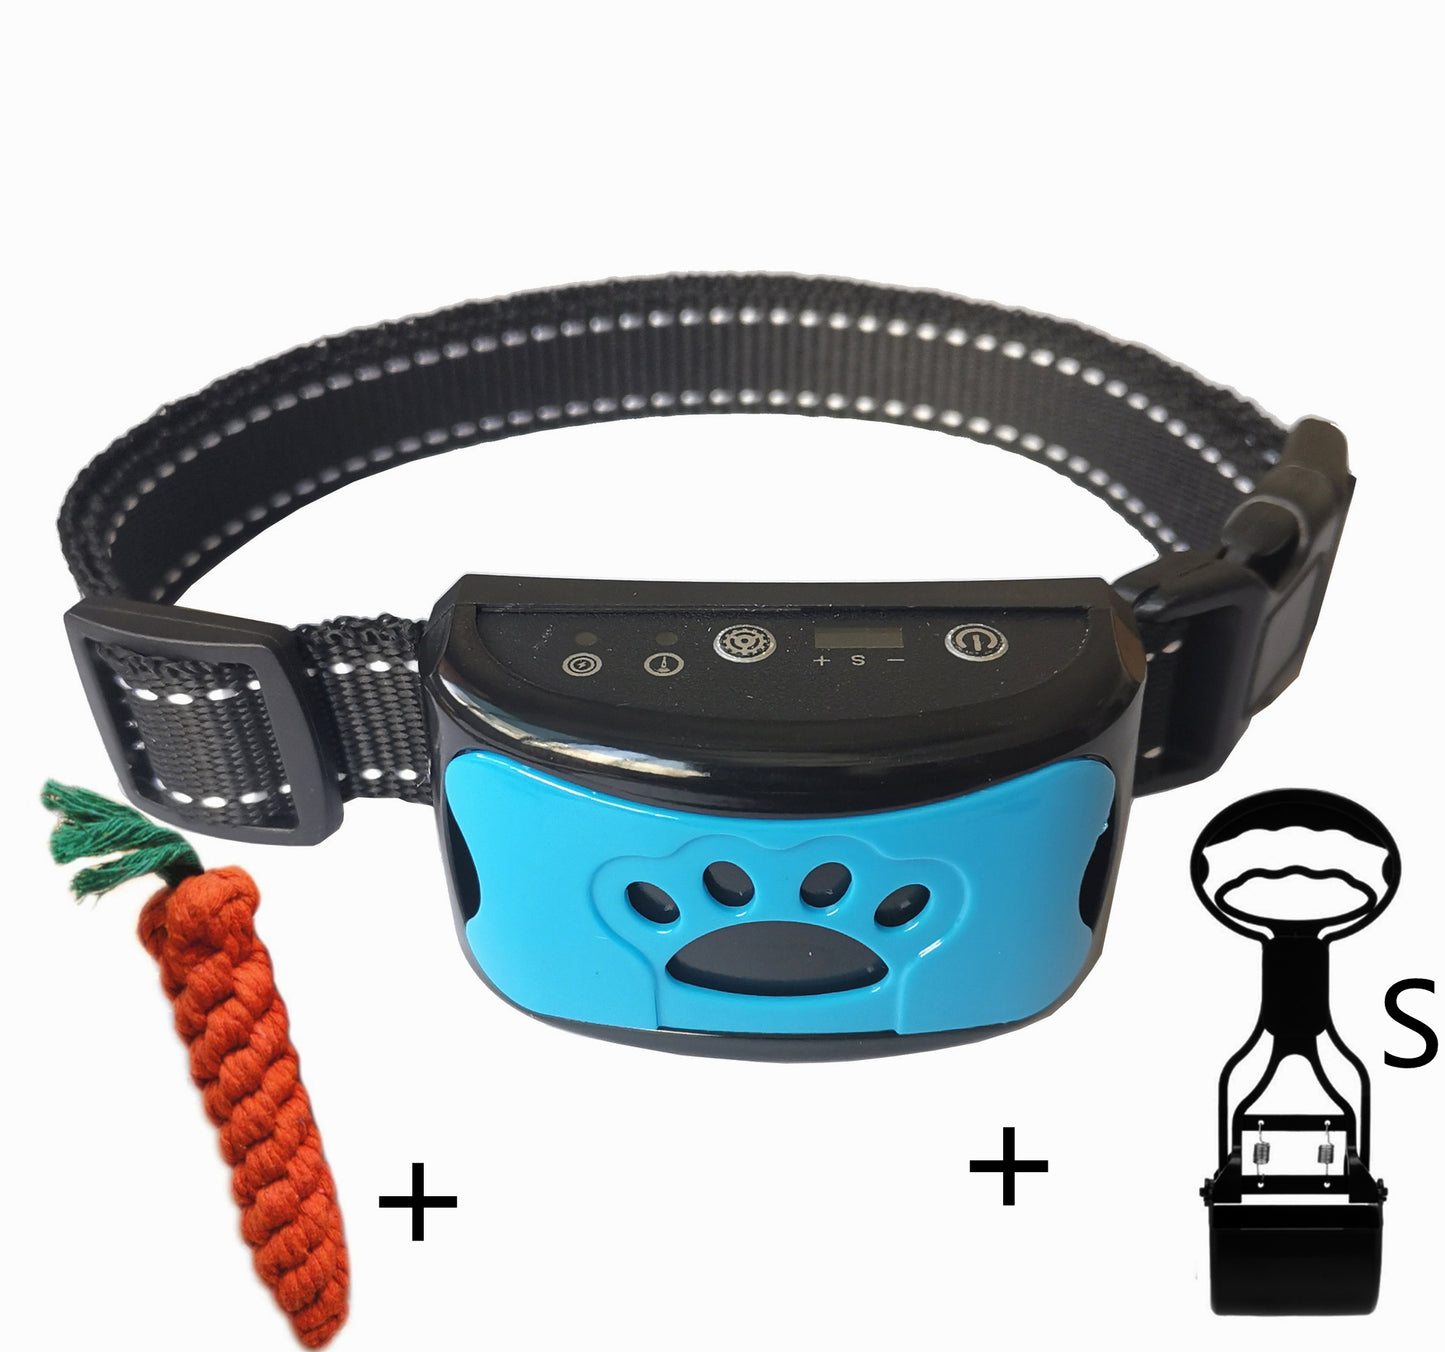 Dog Training Collar Waterproof Electric Pet Remote Control Dogs Trainer